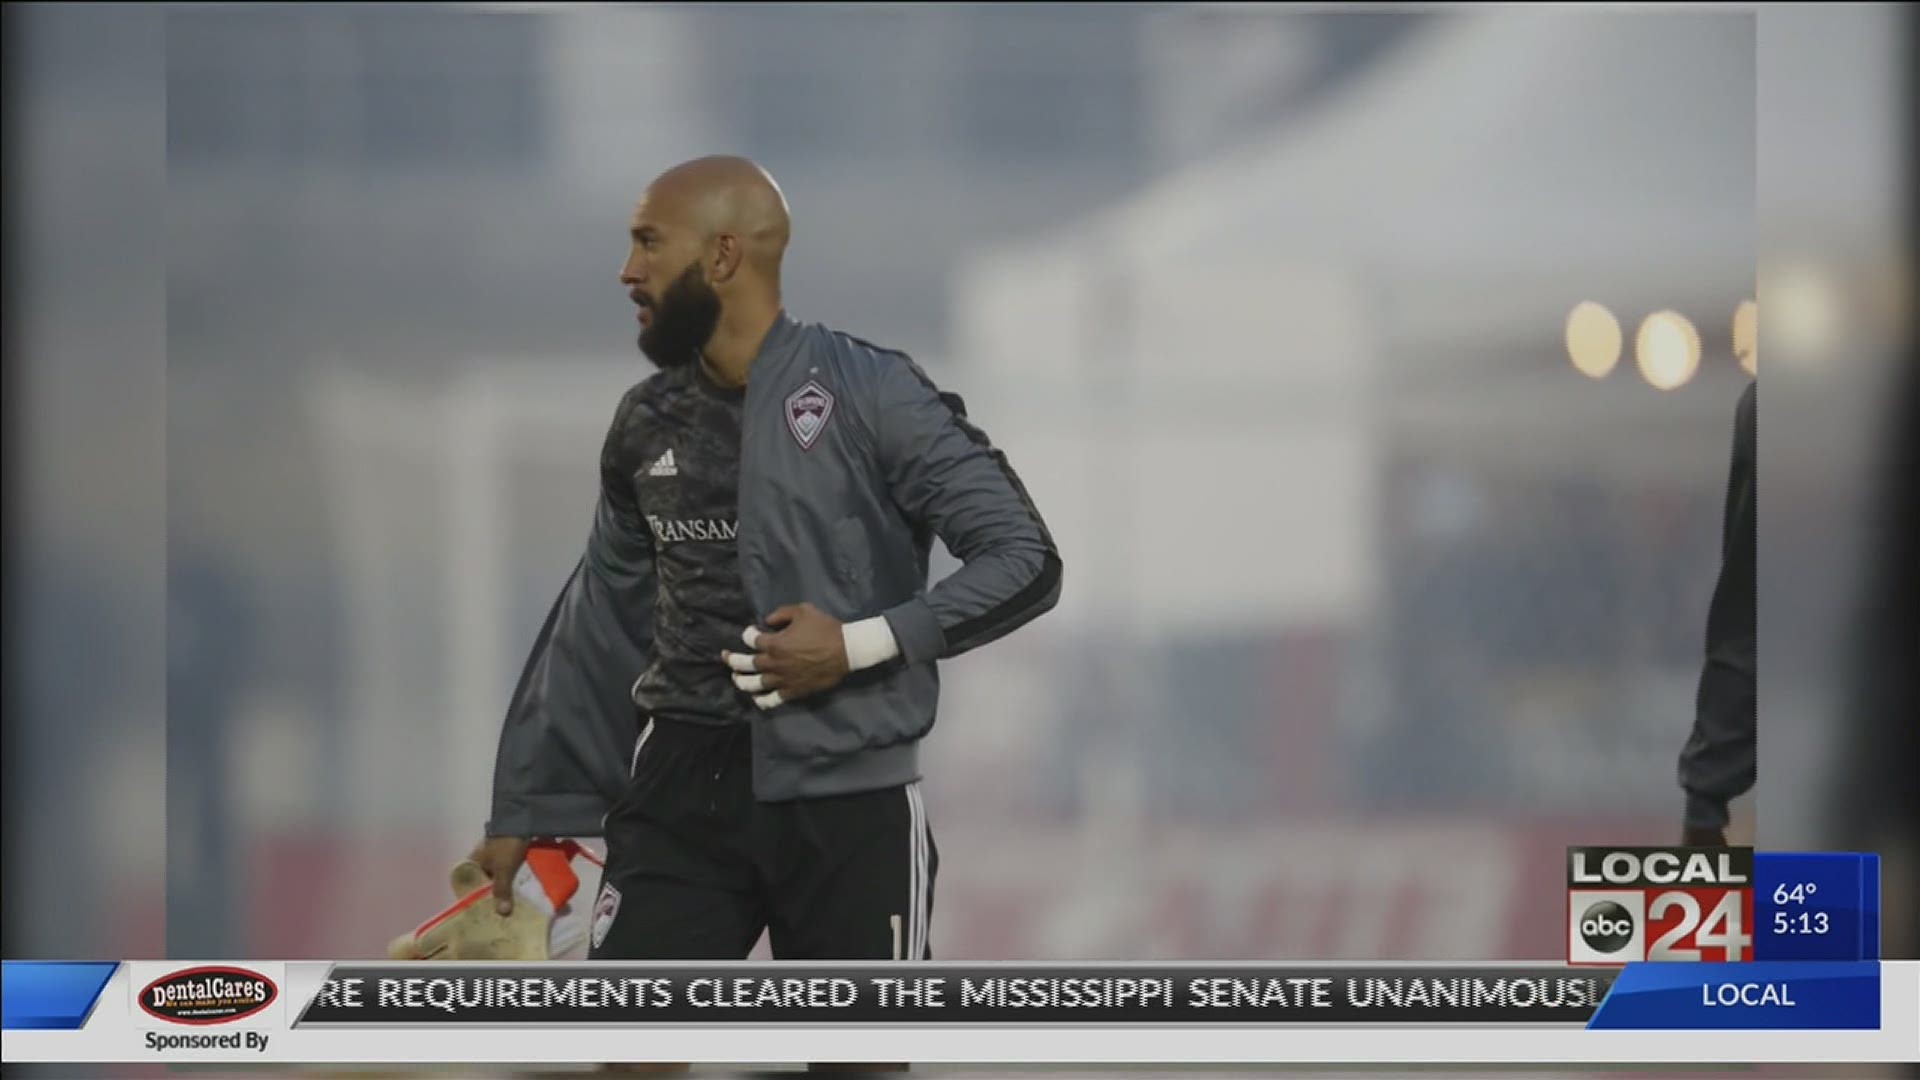 The excitement is building for the start of the Memphis 901 FC's second season, which includes the addition of star goalie Tim Howard to the roster.